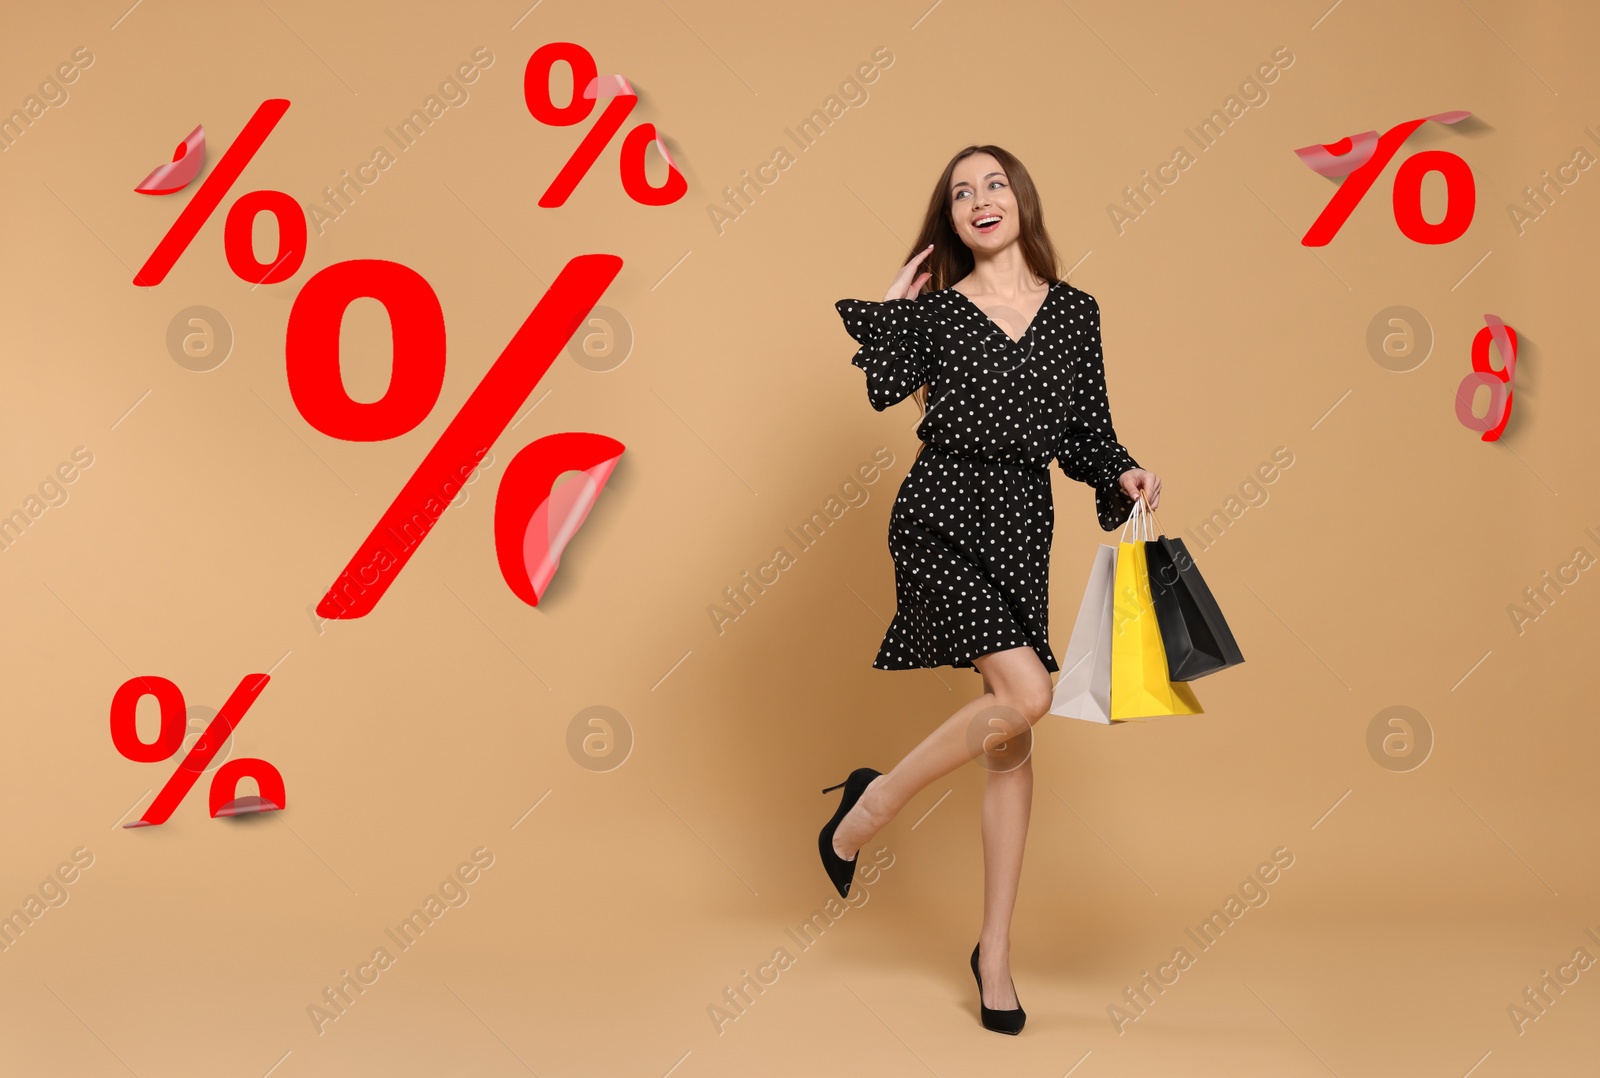 Image of Discount offer. Happy woman with paper shopping bags and percent sign stickers on beige background